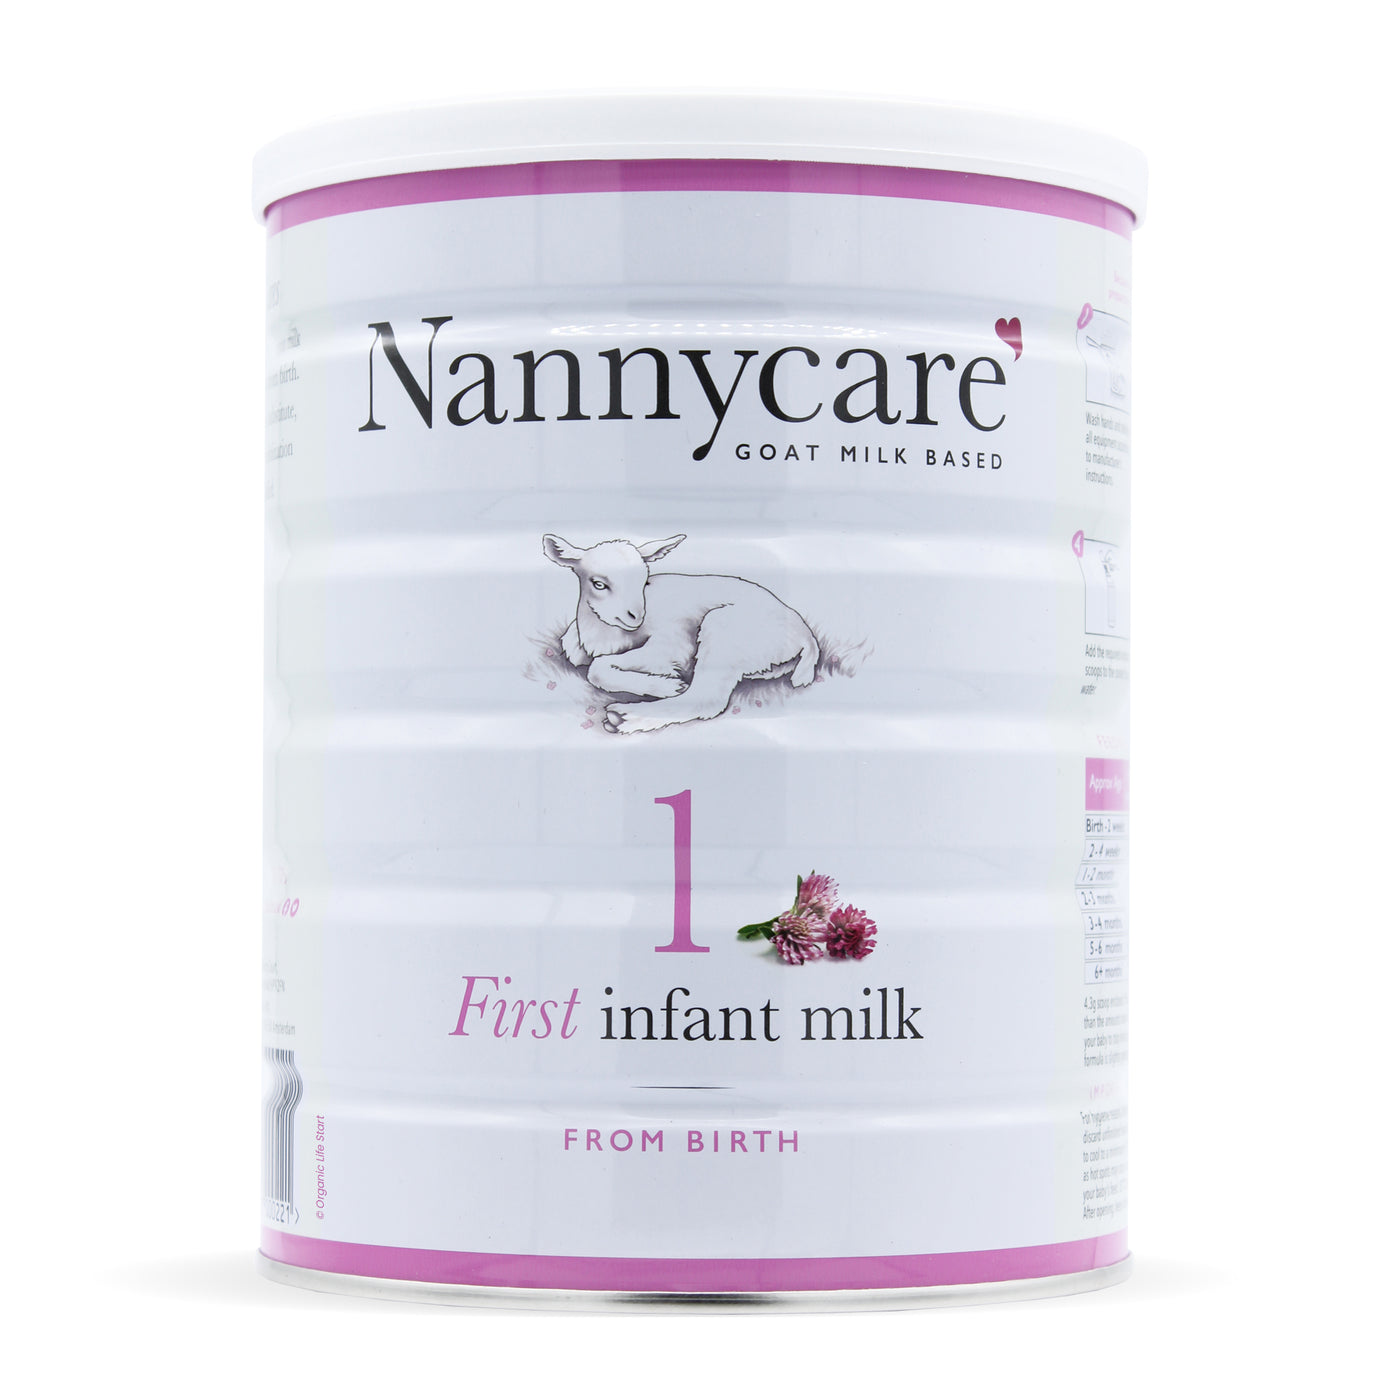 Nannycare Baby Formula: The Ultimate Guide